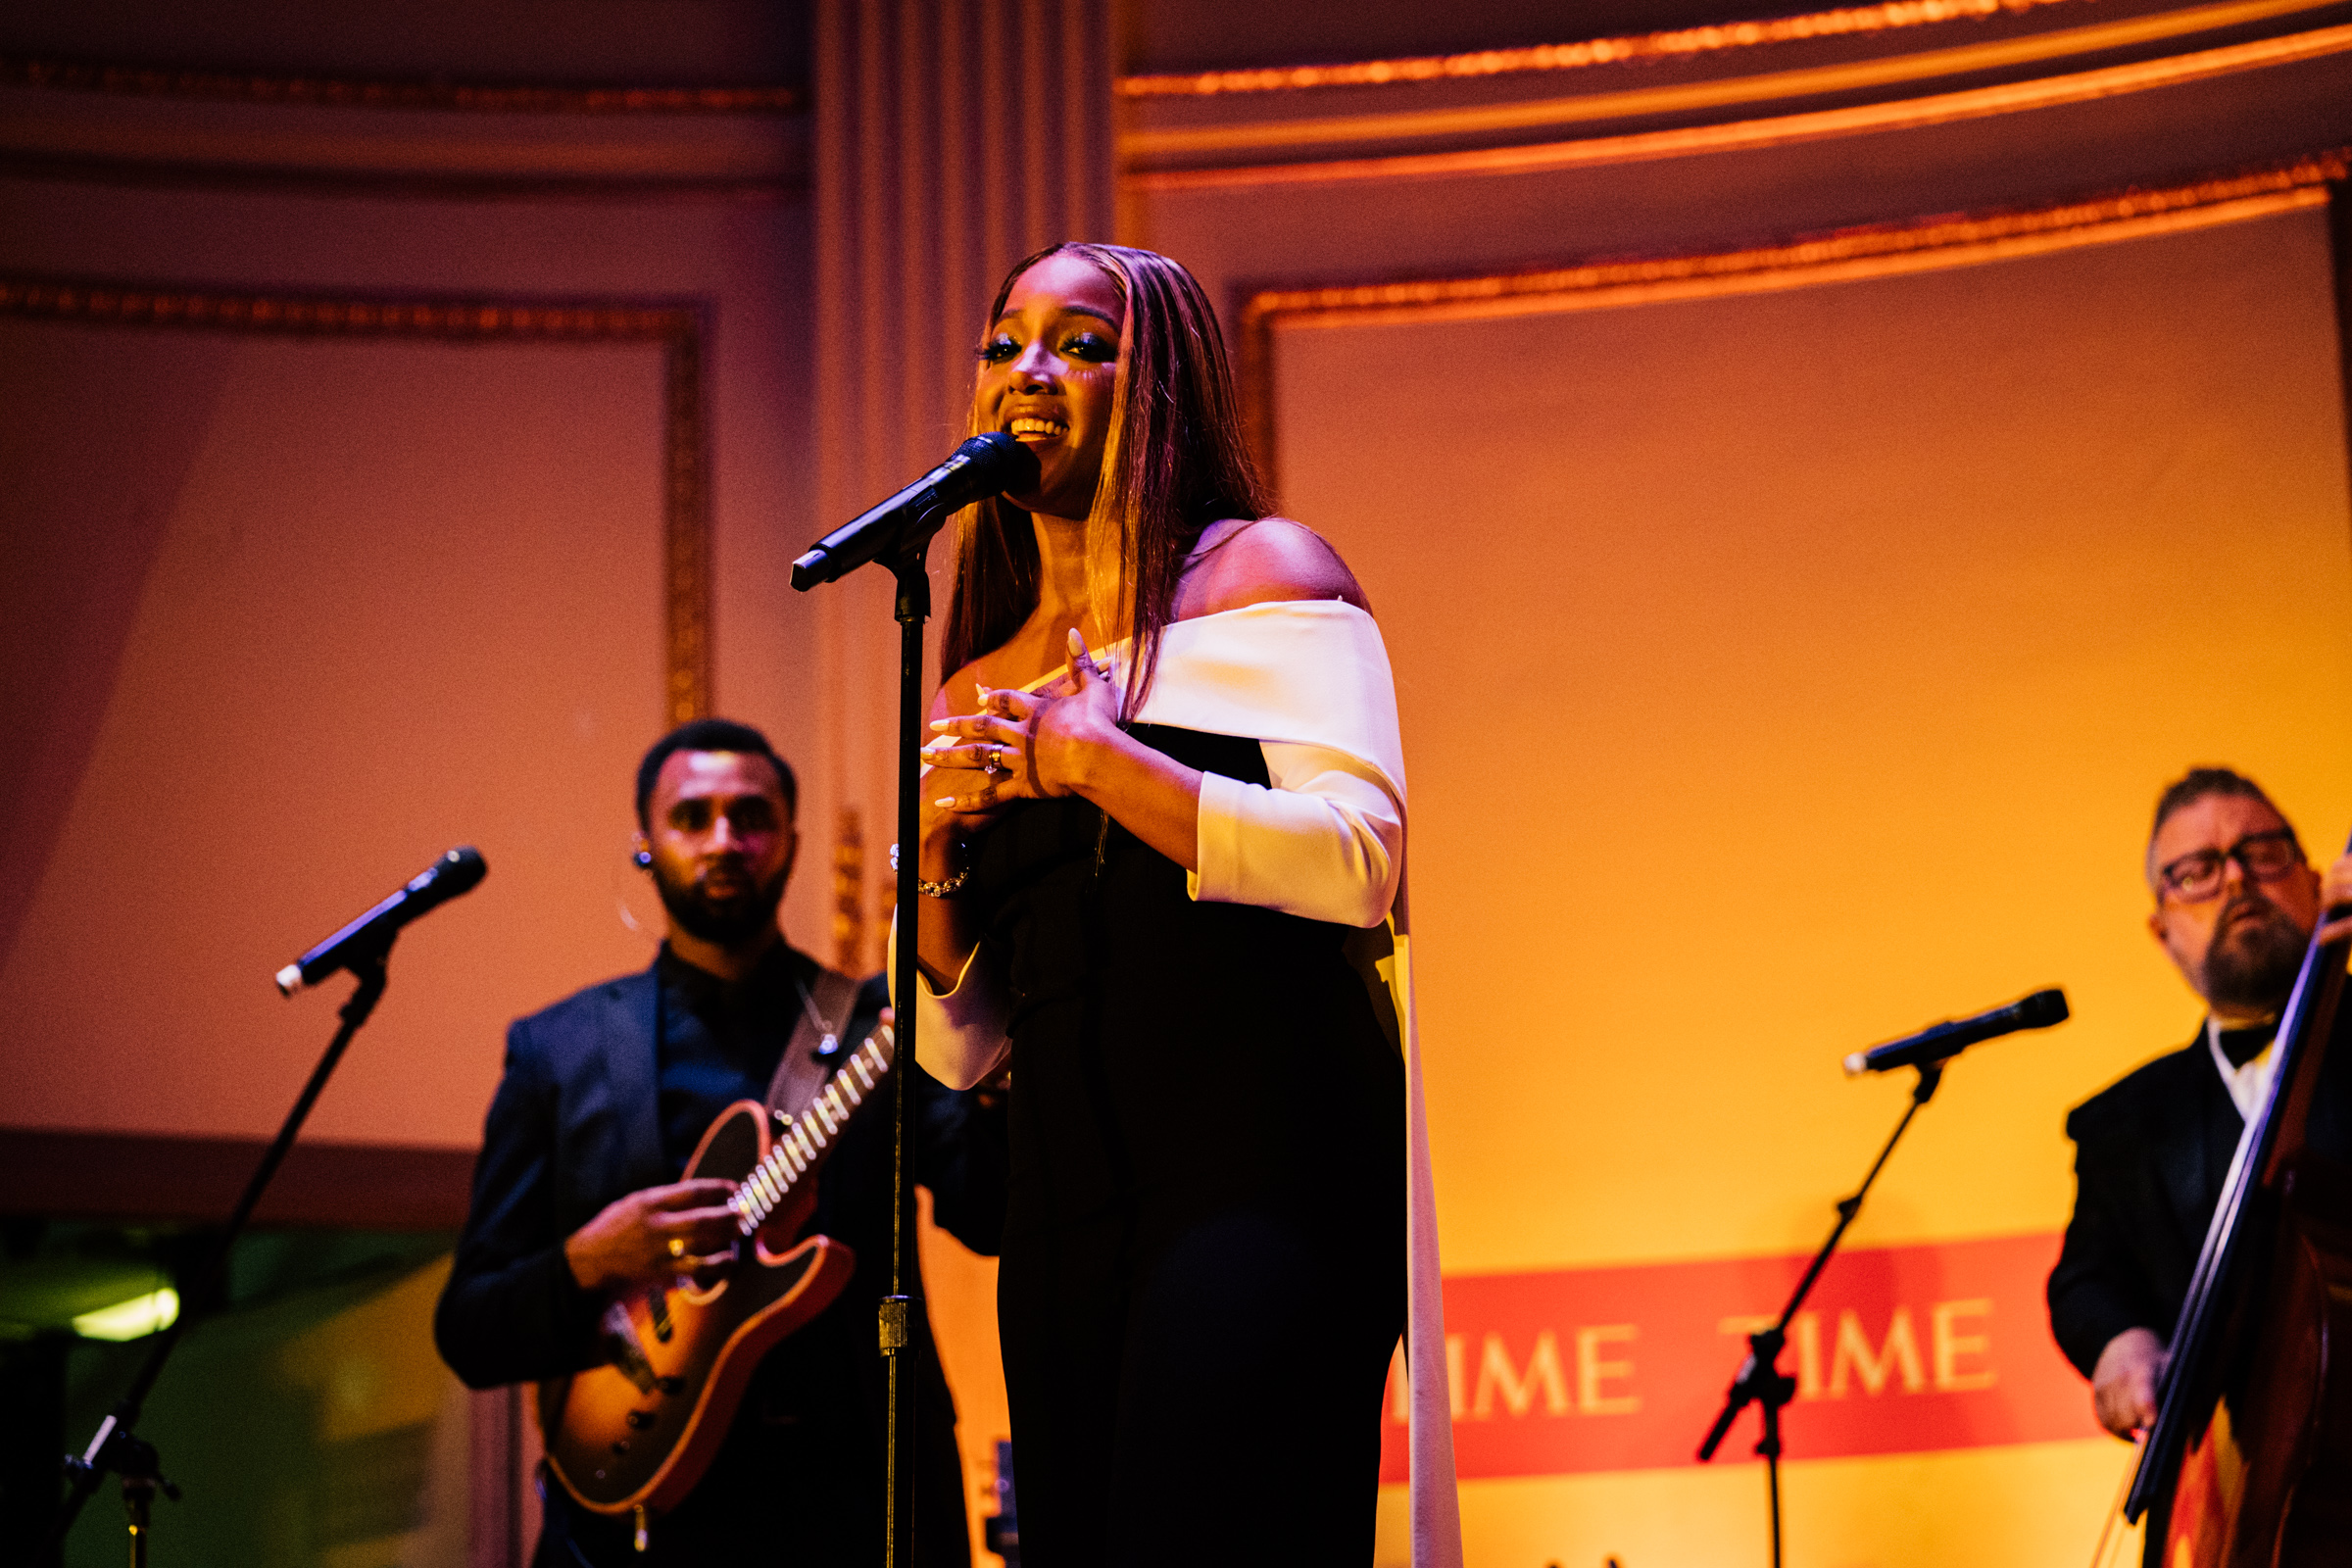 TIME’s 2022 Breakthrough Artist of the Year Mickey Guyton peforming at the TIME 2022 Person of the Year reception, at The Plaza Hotel in New York City, on Dec. 8, 2022.